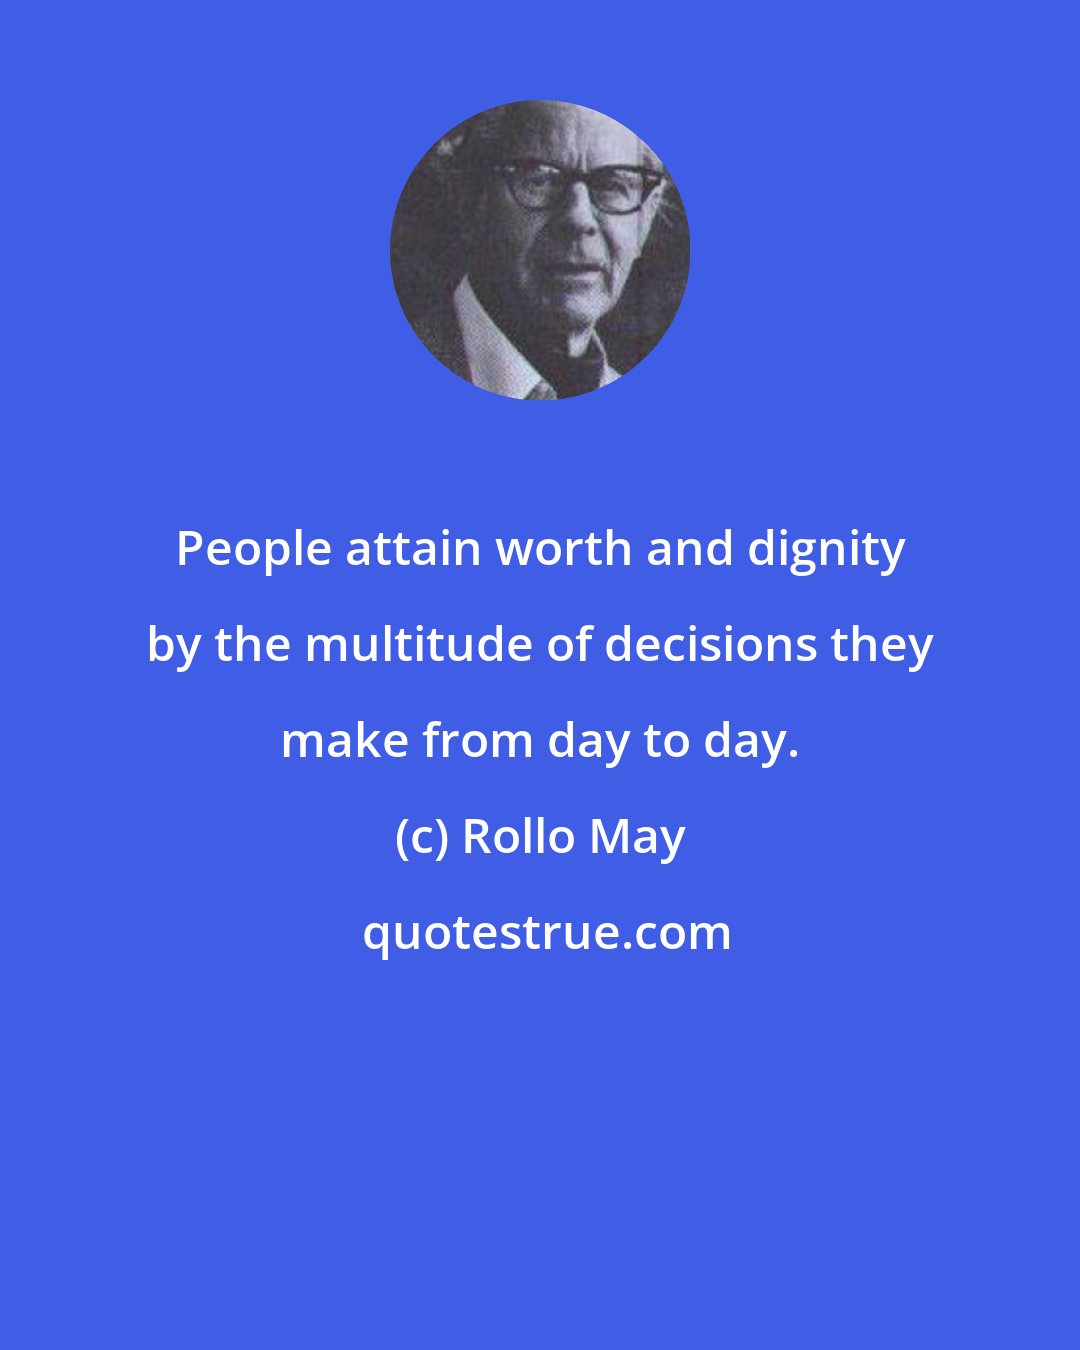 Rollo May: People attain worth and dignity by the multitude of decisions they make from day to day.